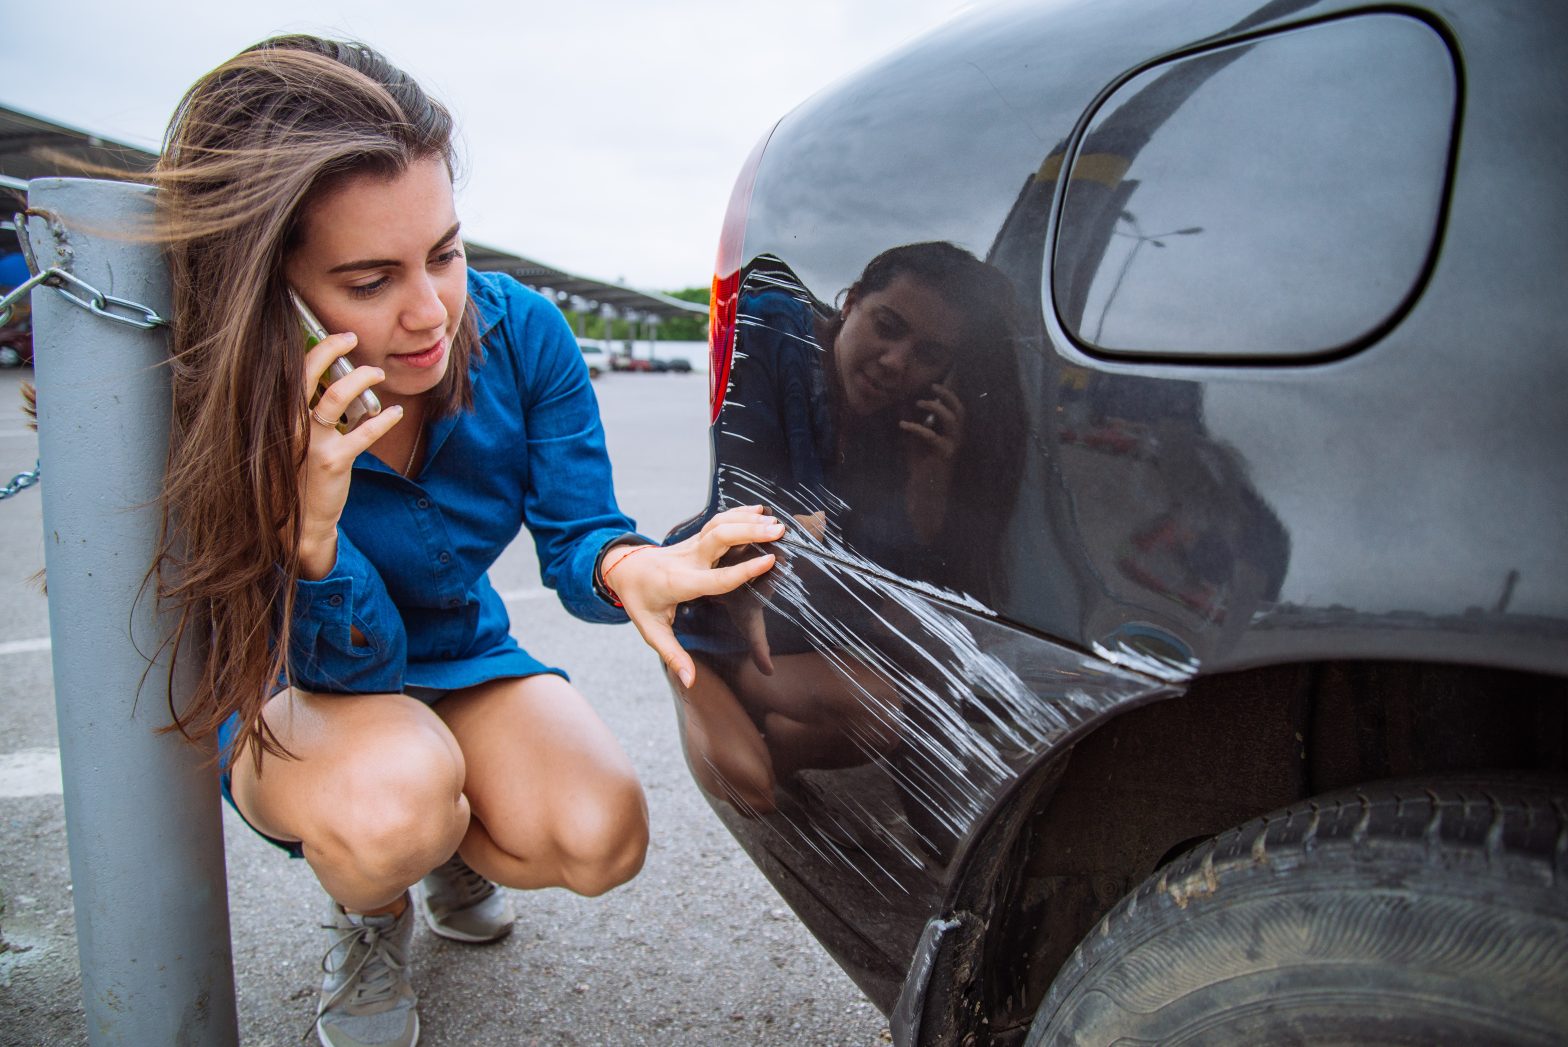 A woman is looking at damage to her car and calling Virginia car accident attorneys.